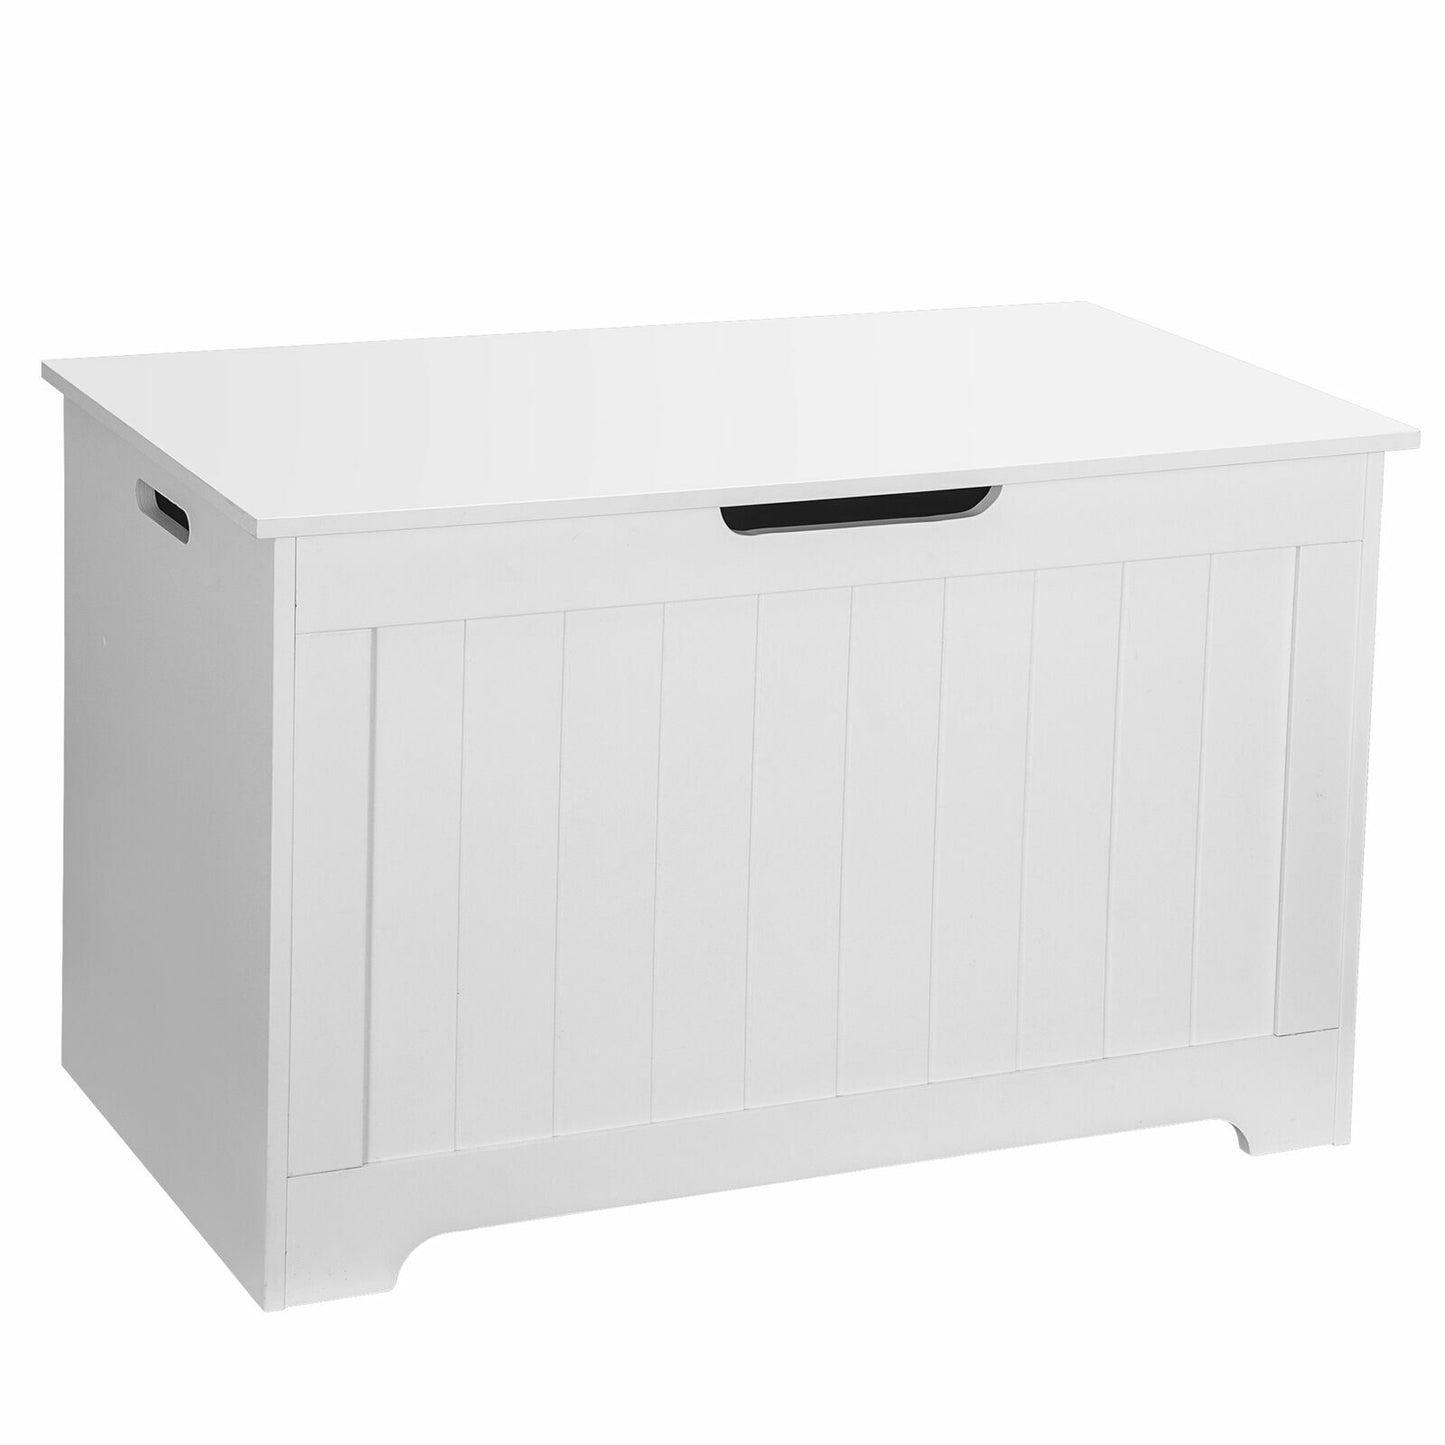 Double Box Entryway Storage Chest Bench Safety Hinge Organizer Furniture Bedroom